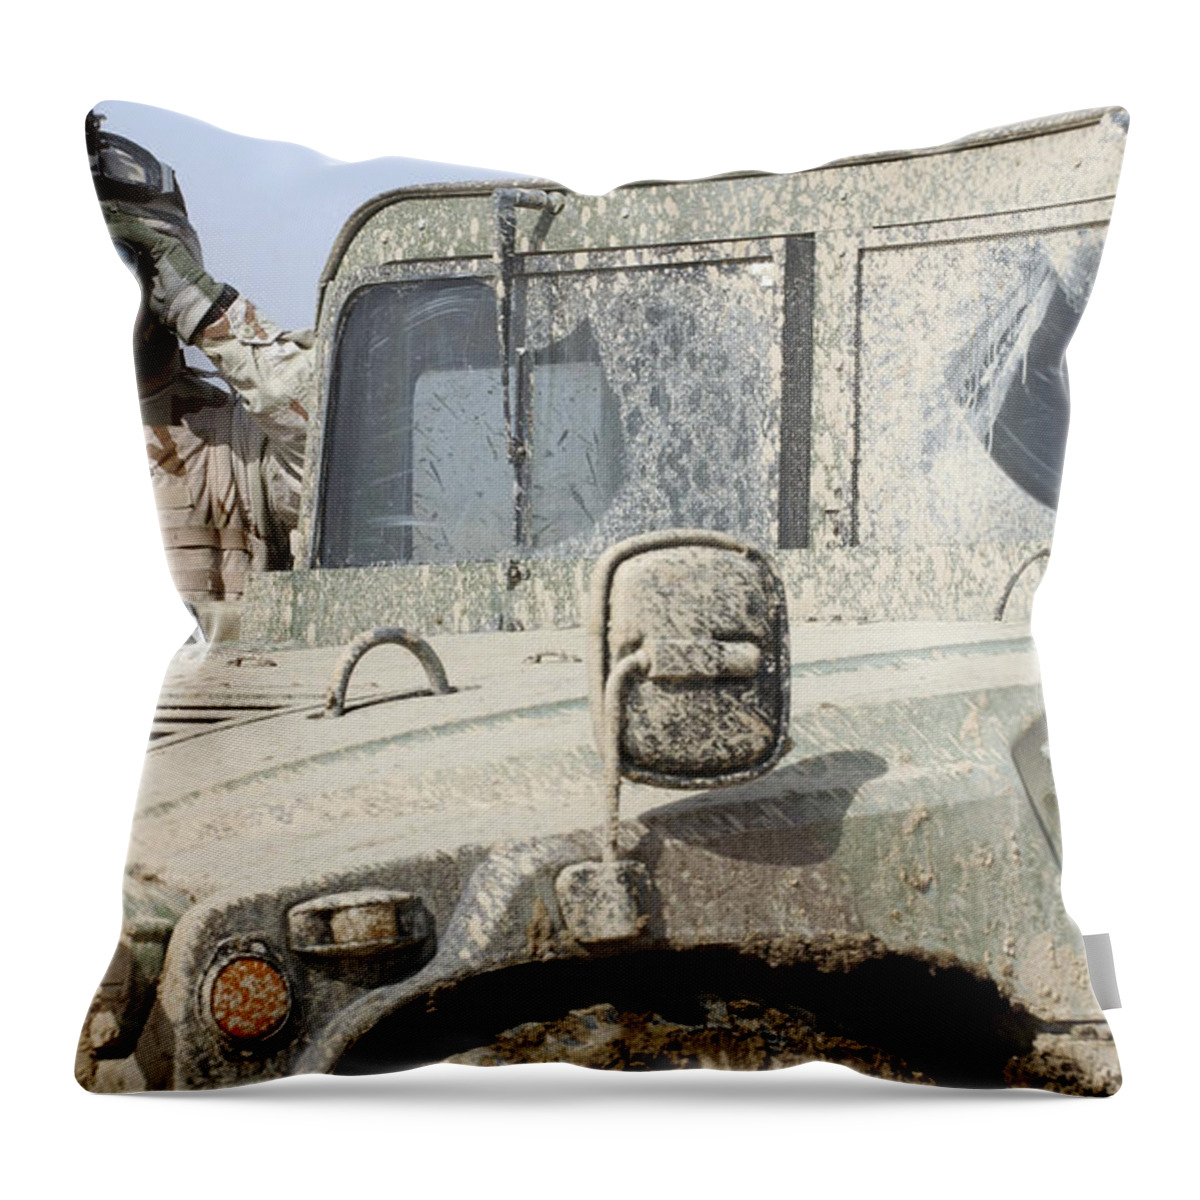 Binoculars Throw Pillow featuring the photograph U.s. Army Specialist Scans by Stocktrek Images